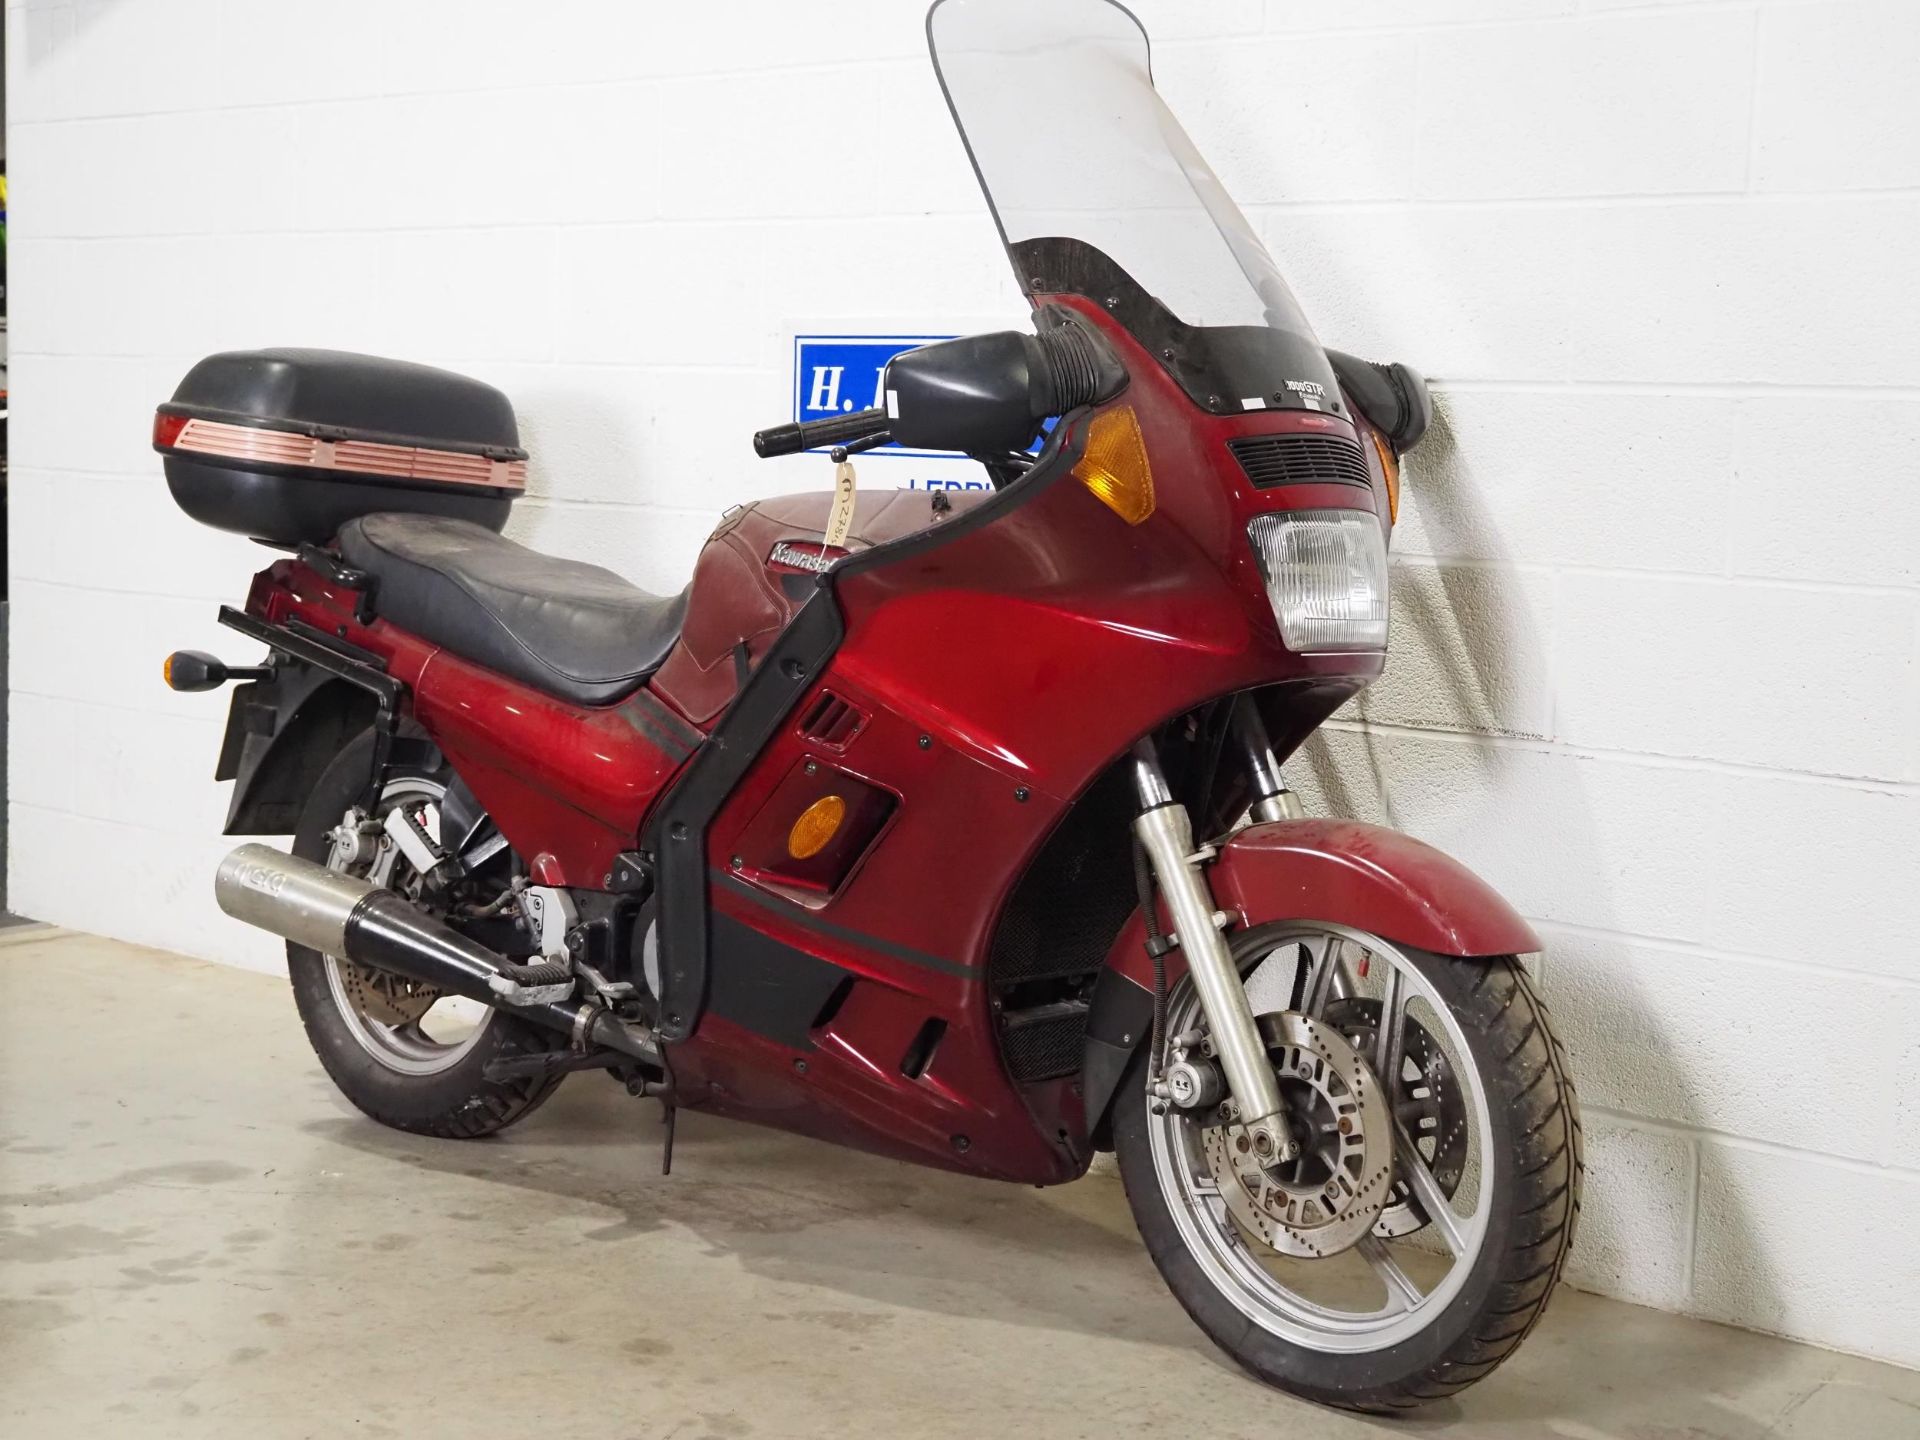 Kawasaki ZG 1000A1 motorcycle. 1986. 997cc. Has been stored for some time so will need - Image 2 of 5